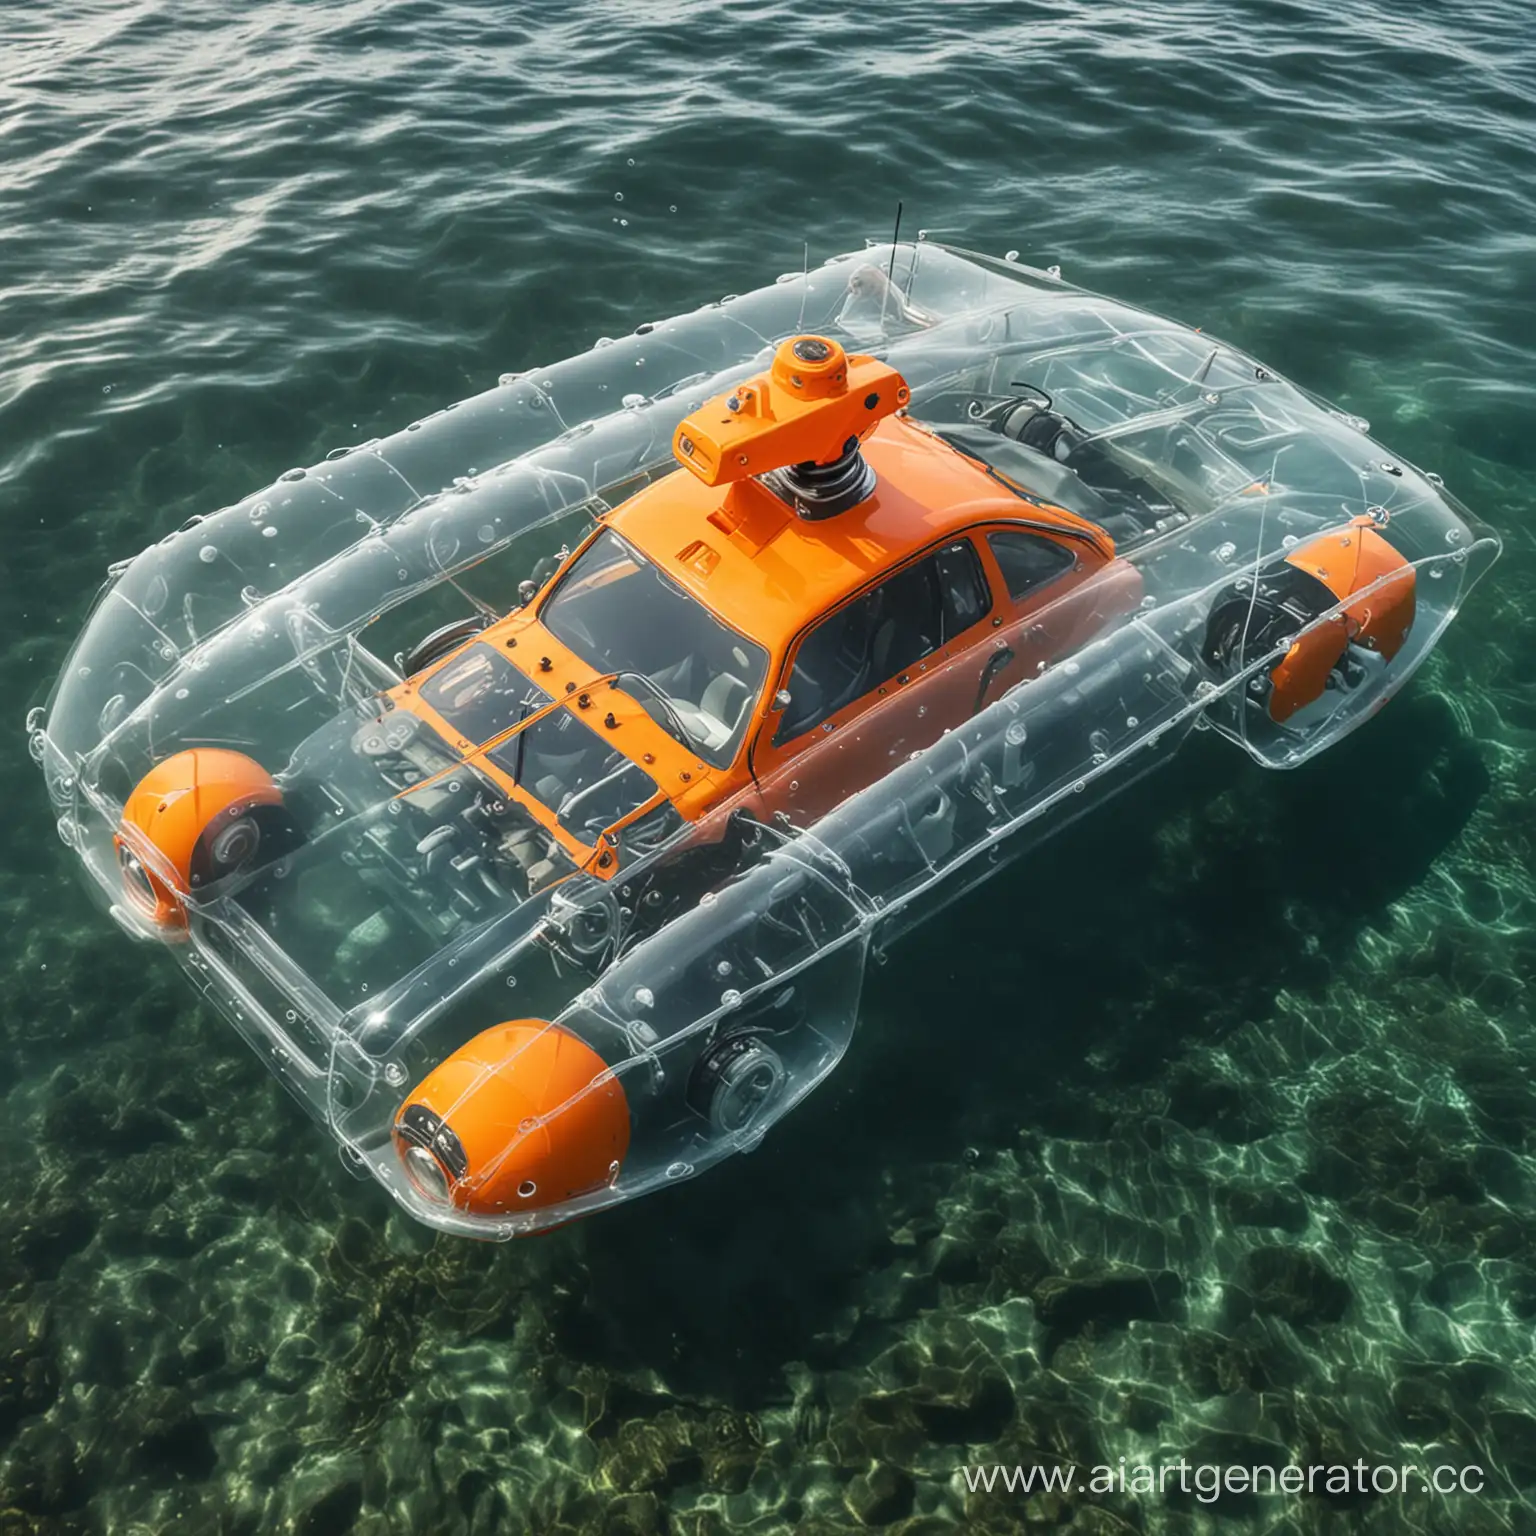 Transparent-Underwater-Car-for-10-People-with-Orange-Whistle